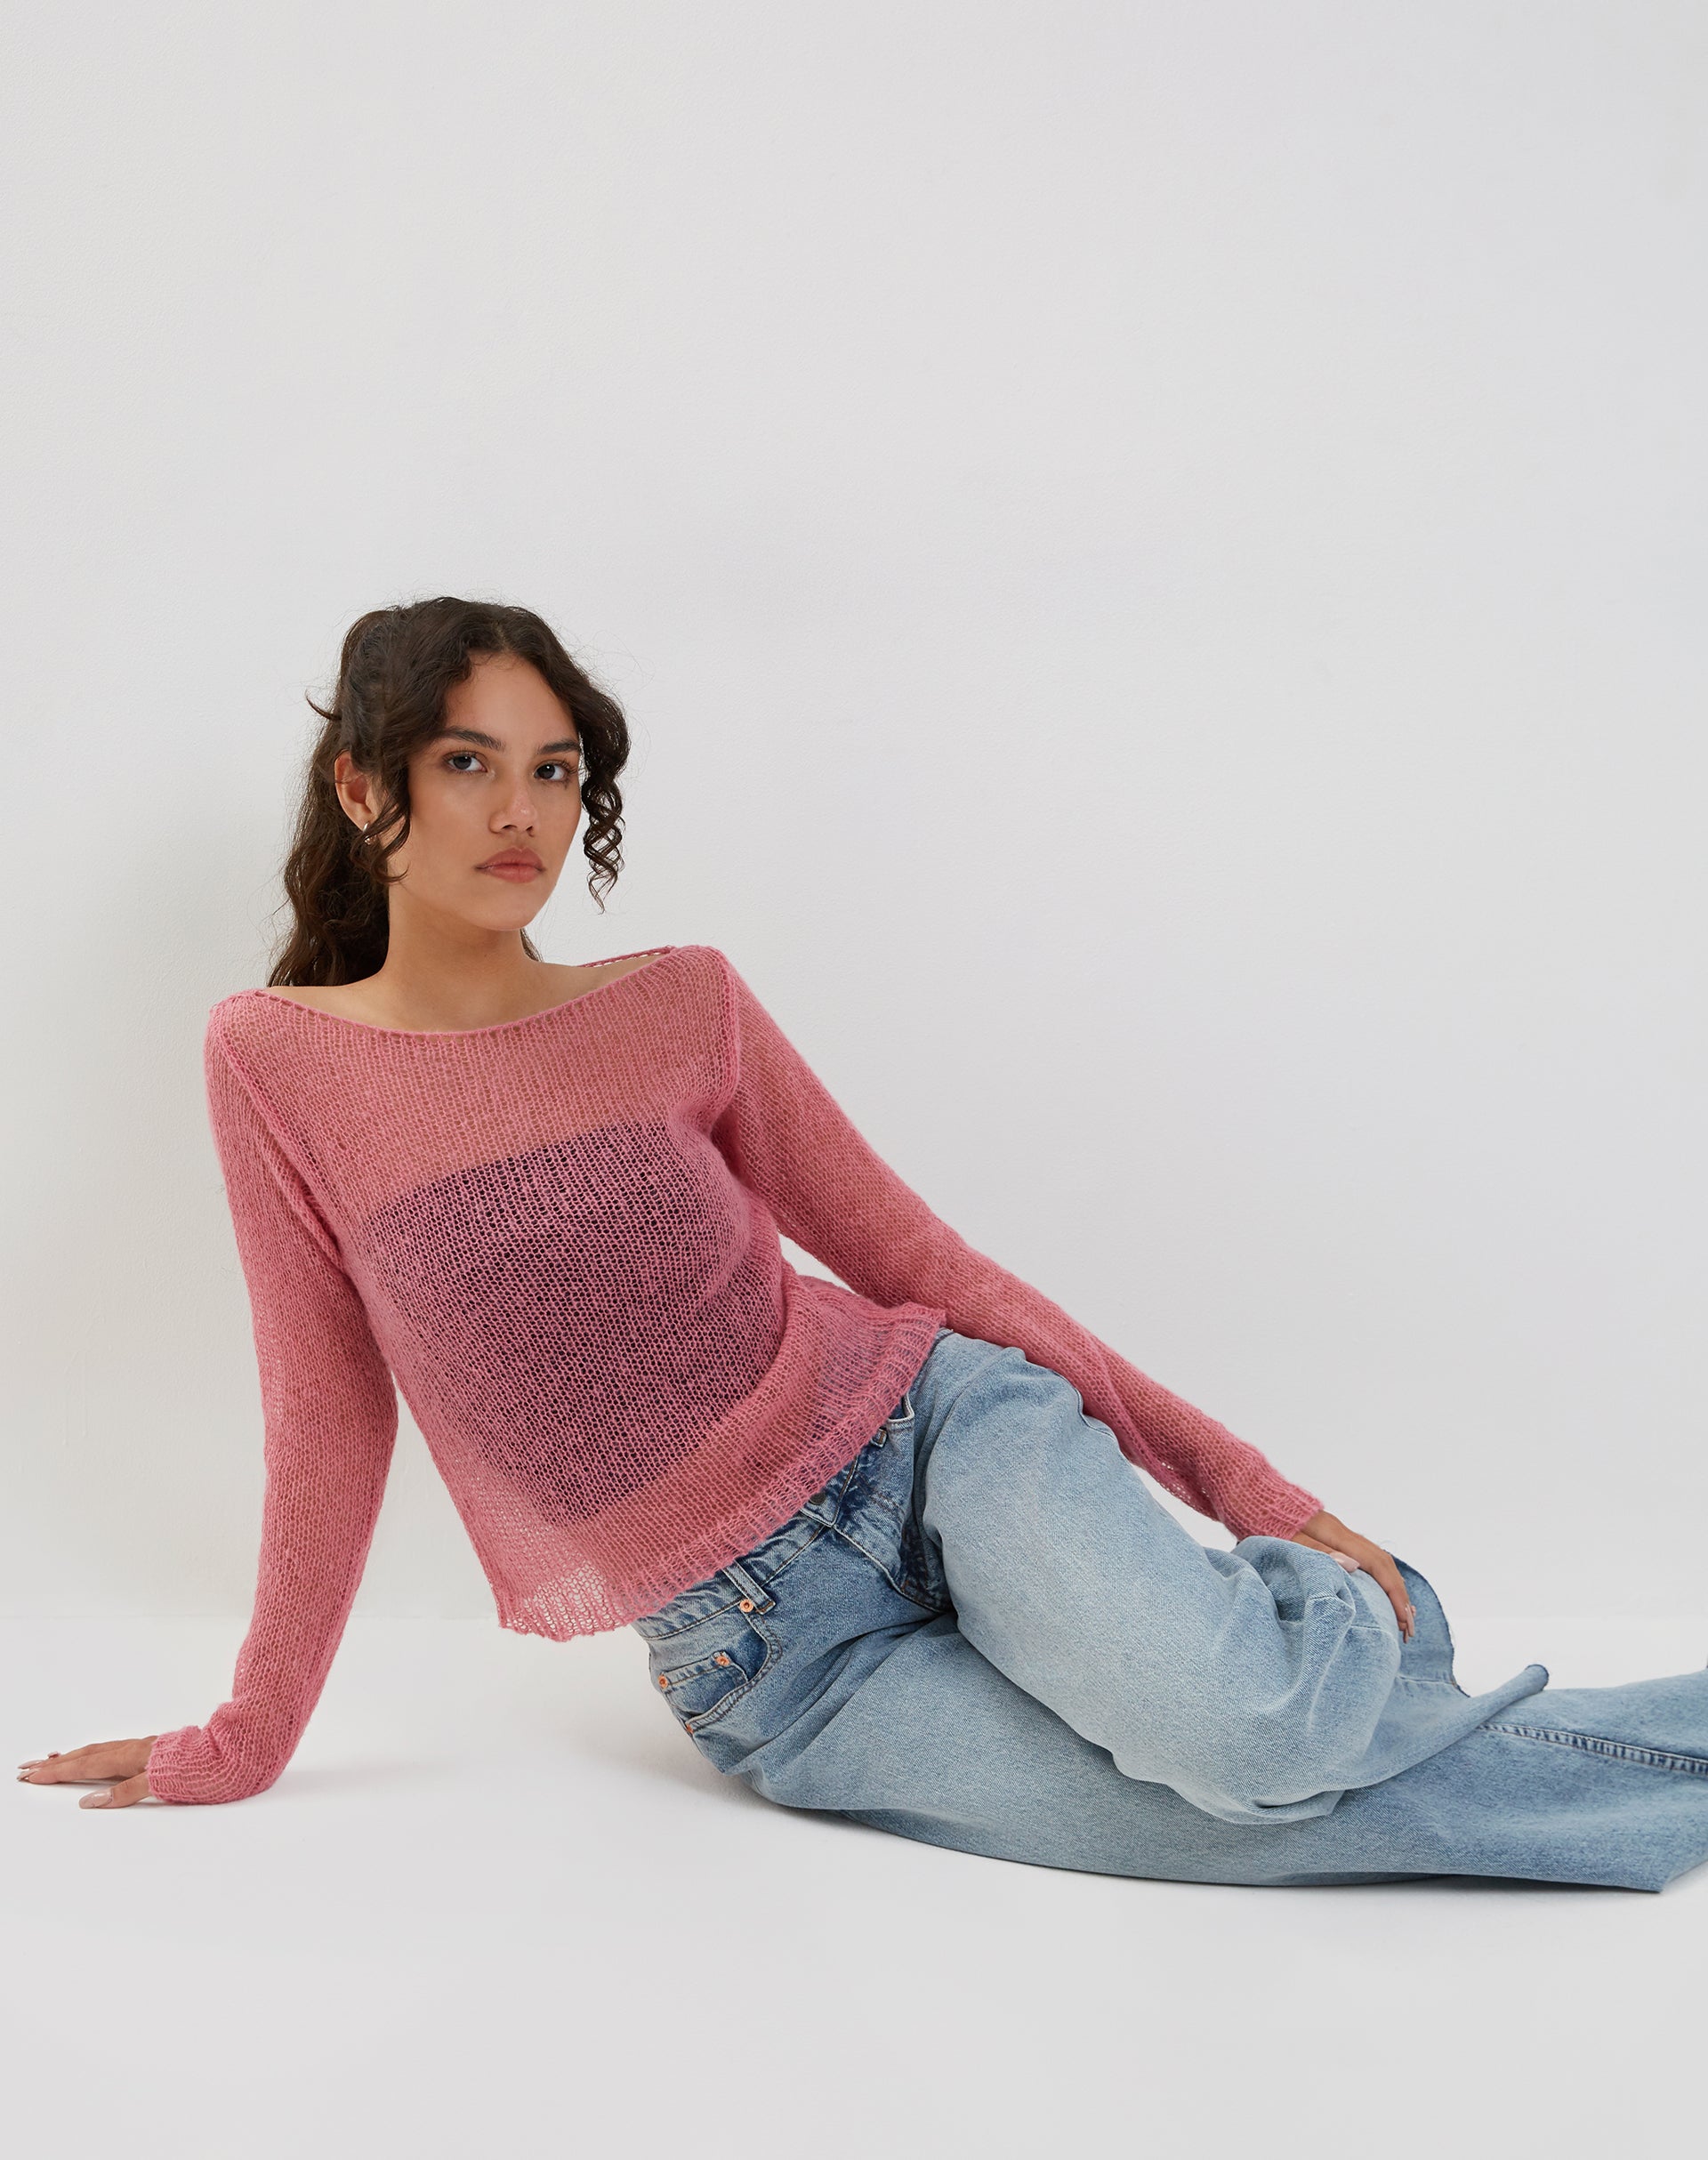 Image of Imelda Fine Open Knit Long Sleeve Top in Pink